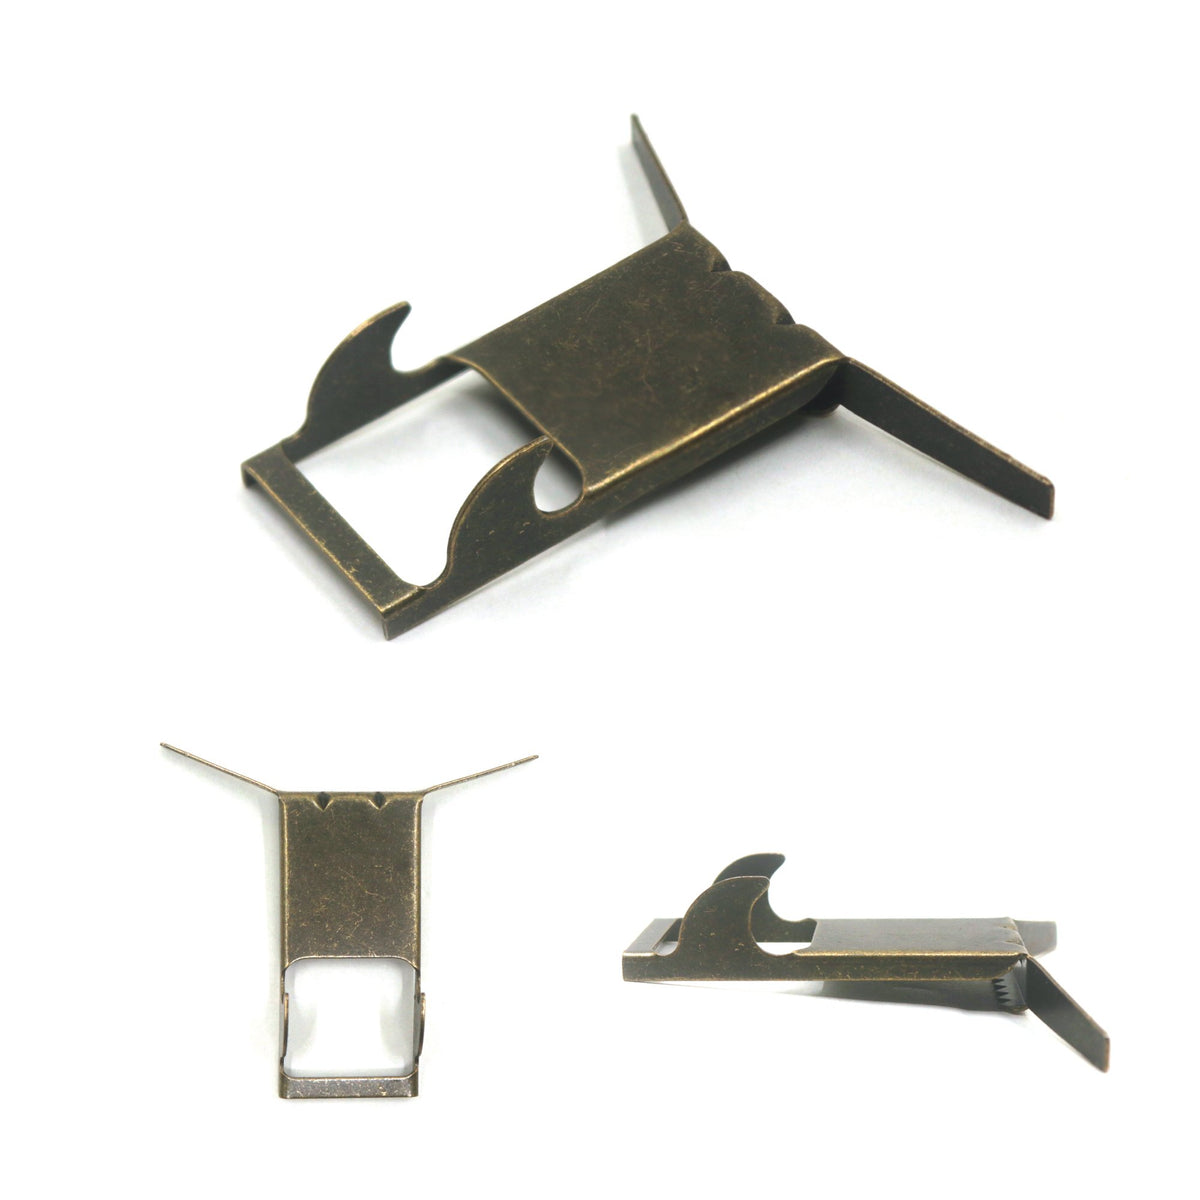 Brick Clips - HWR-216 - Picture Hang Solutions